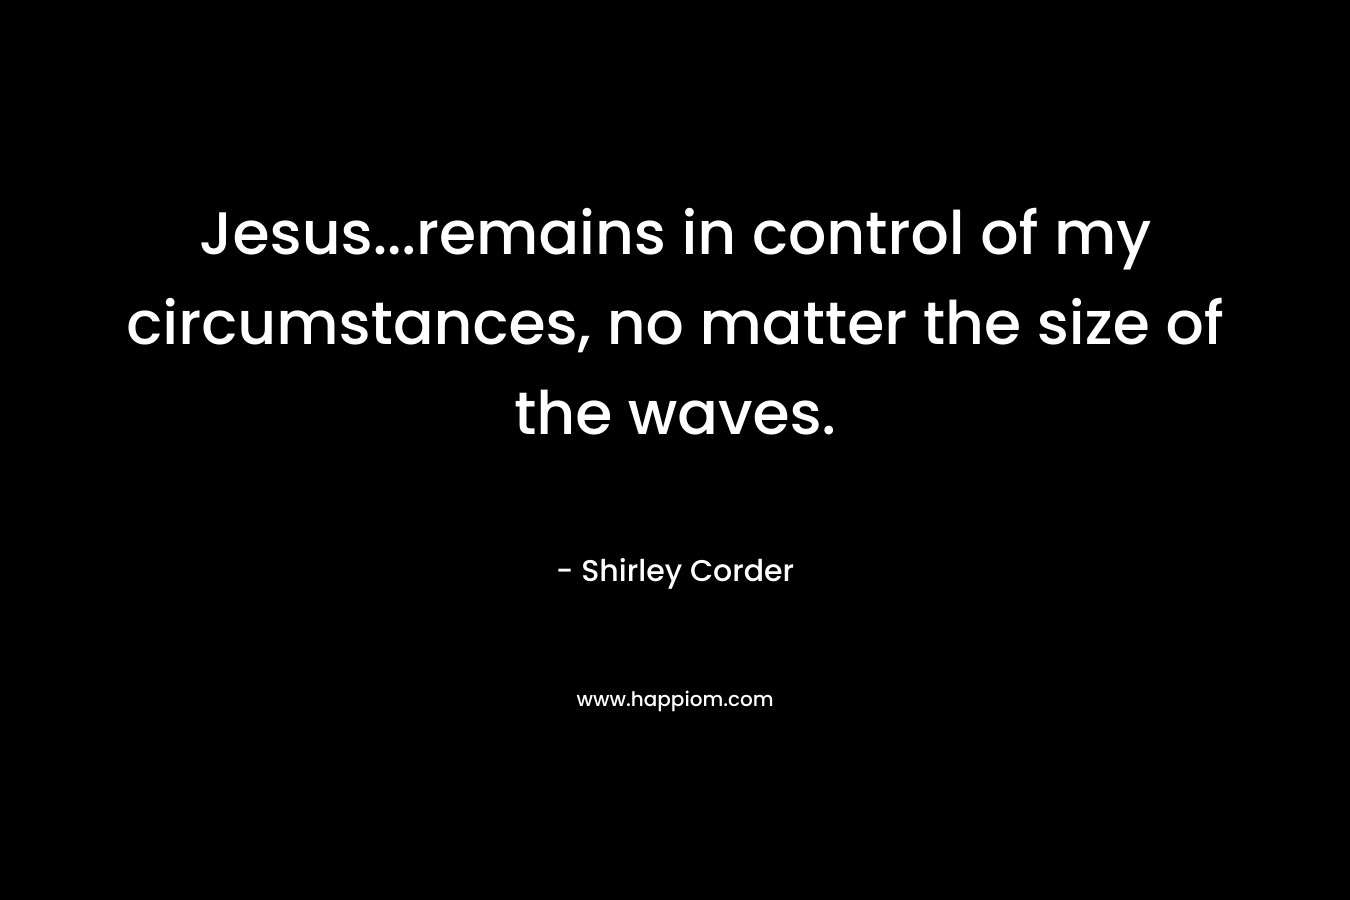 Jesus...remains in control of my circumstances, no matter the size of the waves.